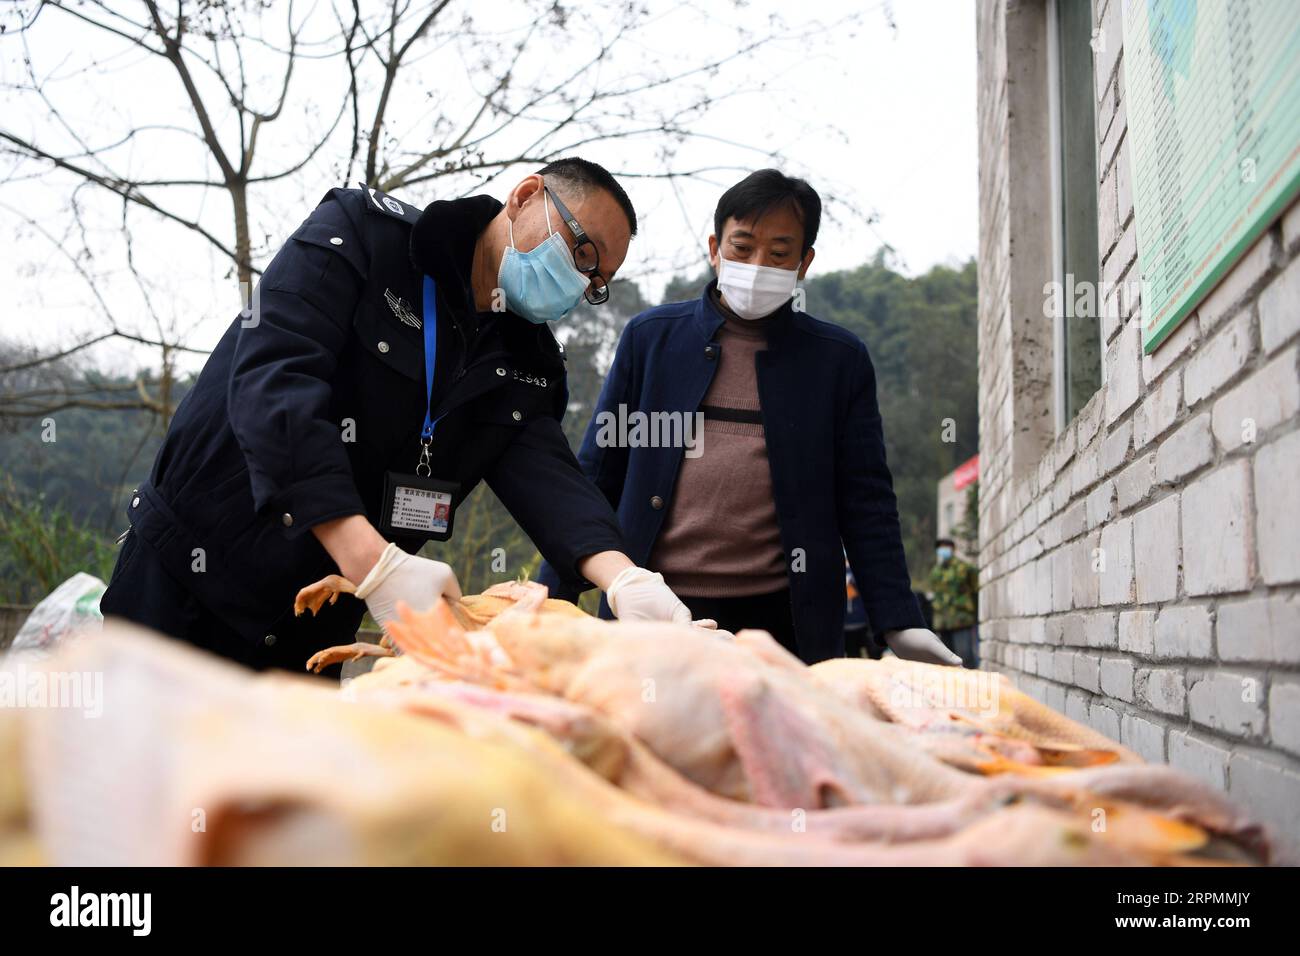 200214 -- CHONGQING, Feb. 14, 2020 -- A staff of local veterinary station checks a butchered duck at Shuangjing village of Yufengshan Town in Yubei District of southwest China s Chongqing Municipality, Feb. 14, 2020. Since the outbreak of the novel coronavirus, Fu Zongyong, a poverty-striken farmer has been unable to sell his ducks due to the closing of live poultry markets. Local authorities sent staff to help him with quarantine and sales of ducks to ensure his income during the battle against the epidemic.  CHINA-CHONGQING-NCP-PREVENTION-POVERTY ALLEVIATION CN TangxYi PUBLICATIONxNOTxINxCHN Stock Photo